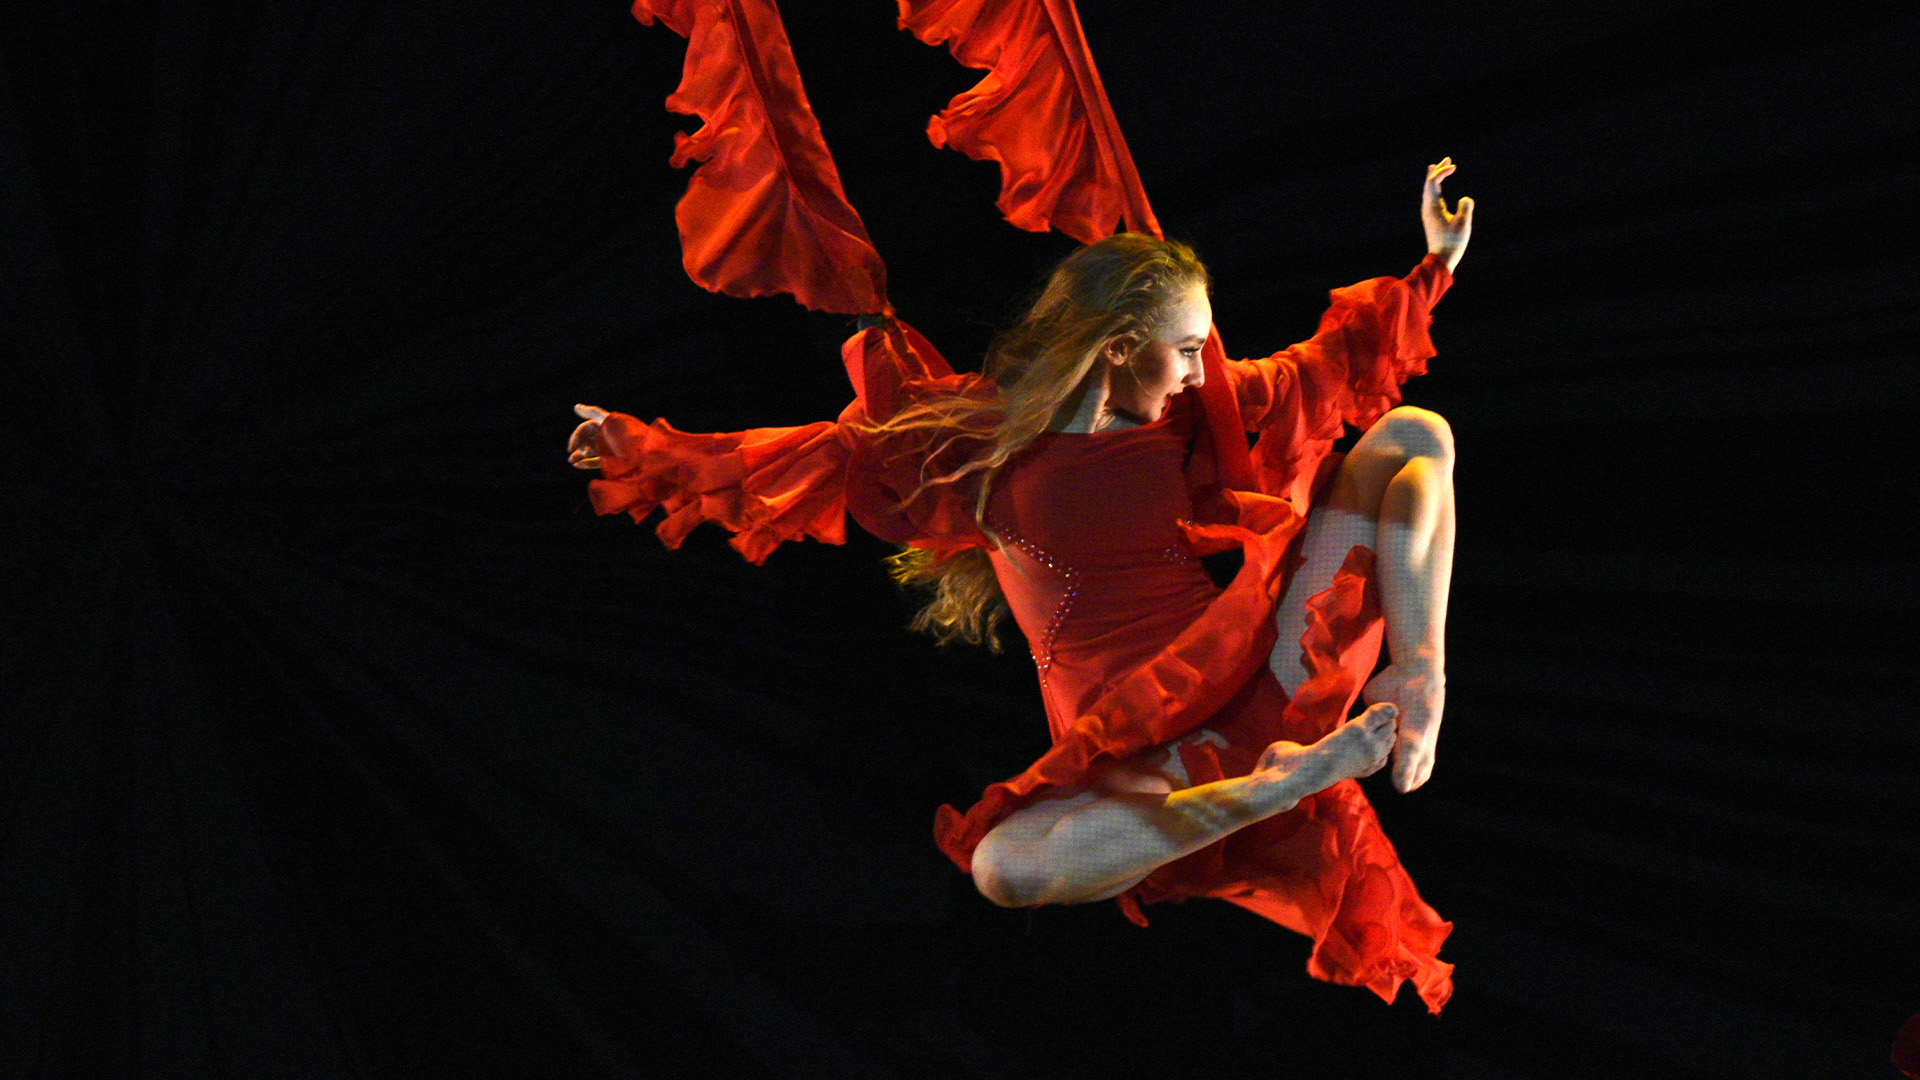 Female dancer wearing a red frilly costume flying in from the left on a trapeze